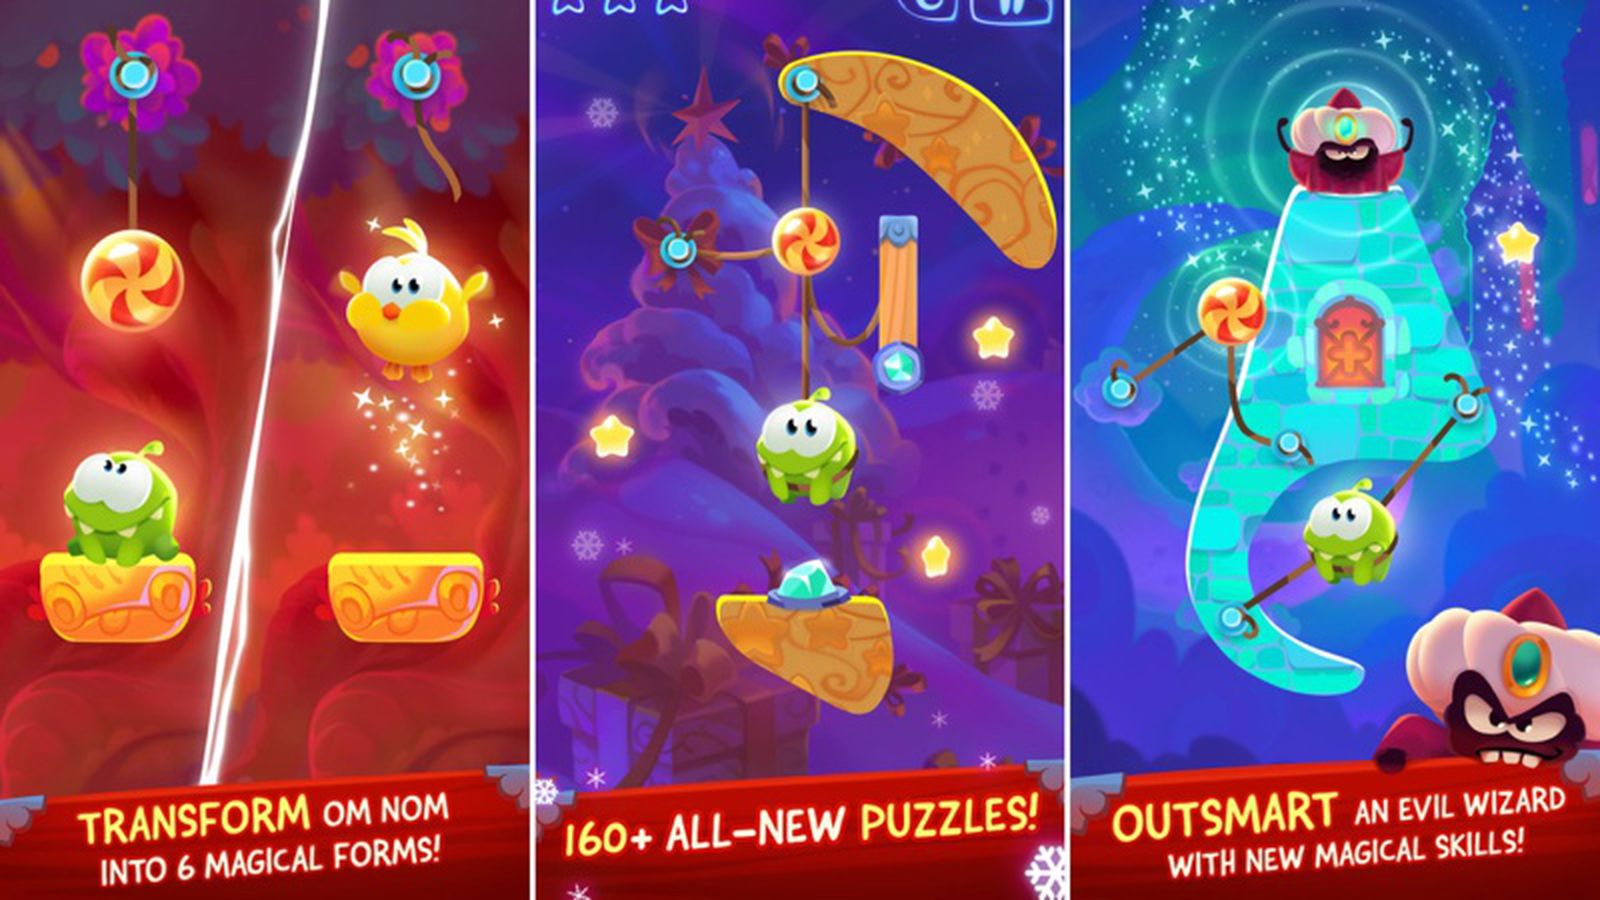 NEW Game! Play Cut the Rope: Magic 